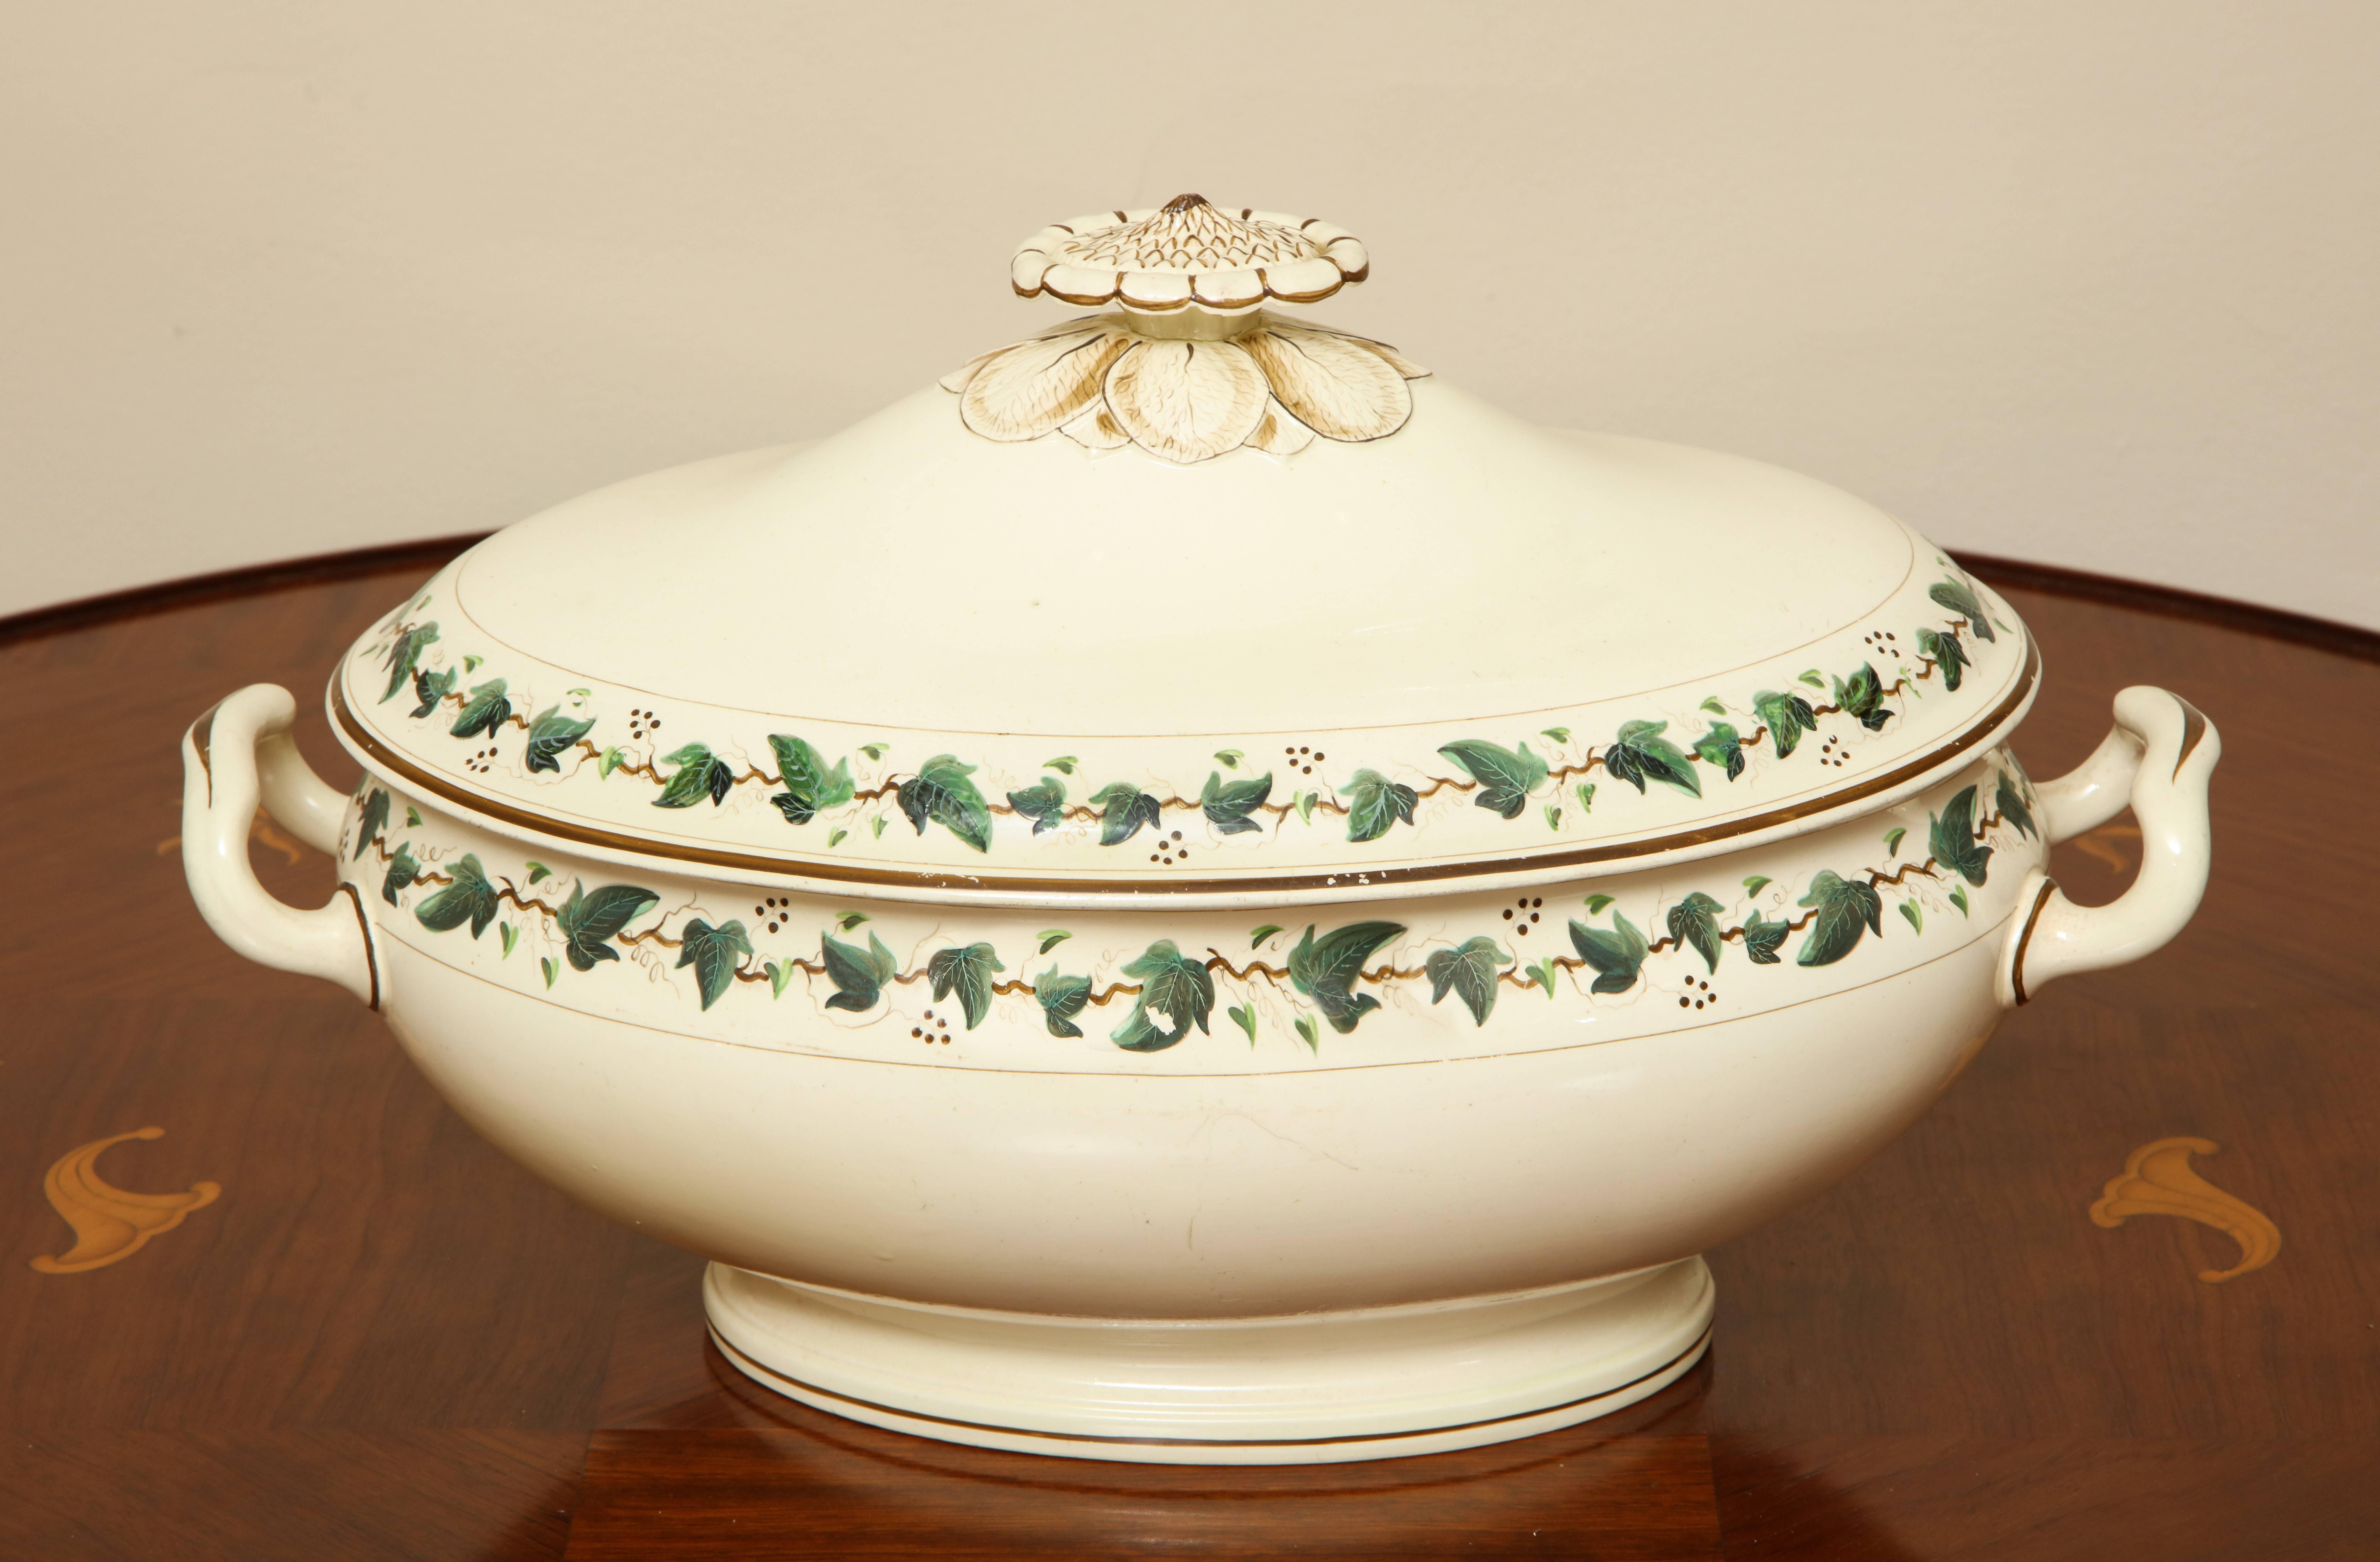 Wedgwood Creamware Covered Tureen with Ivy Decoration 1